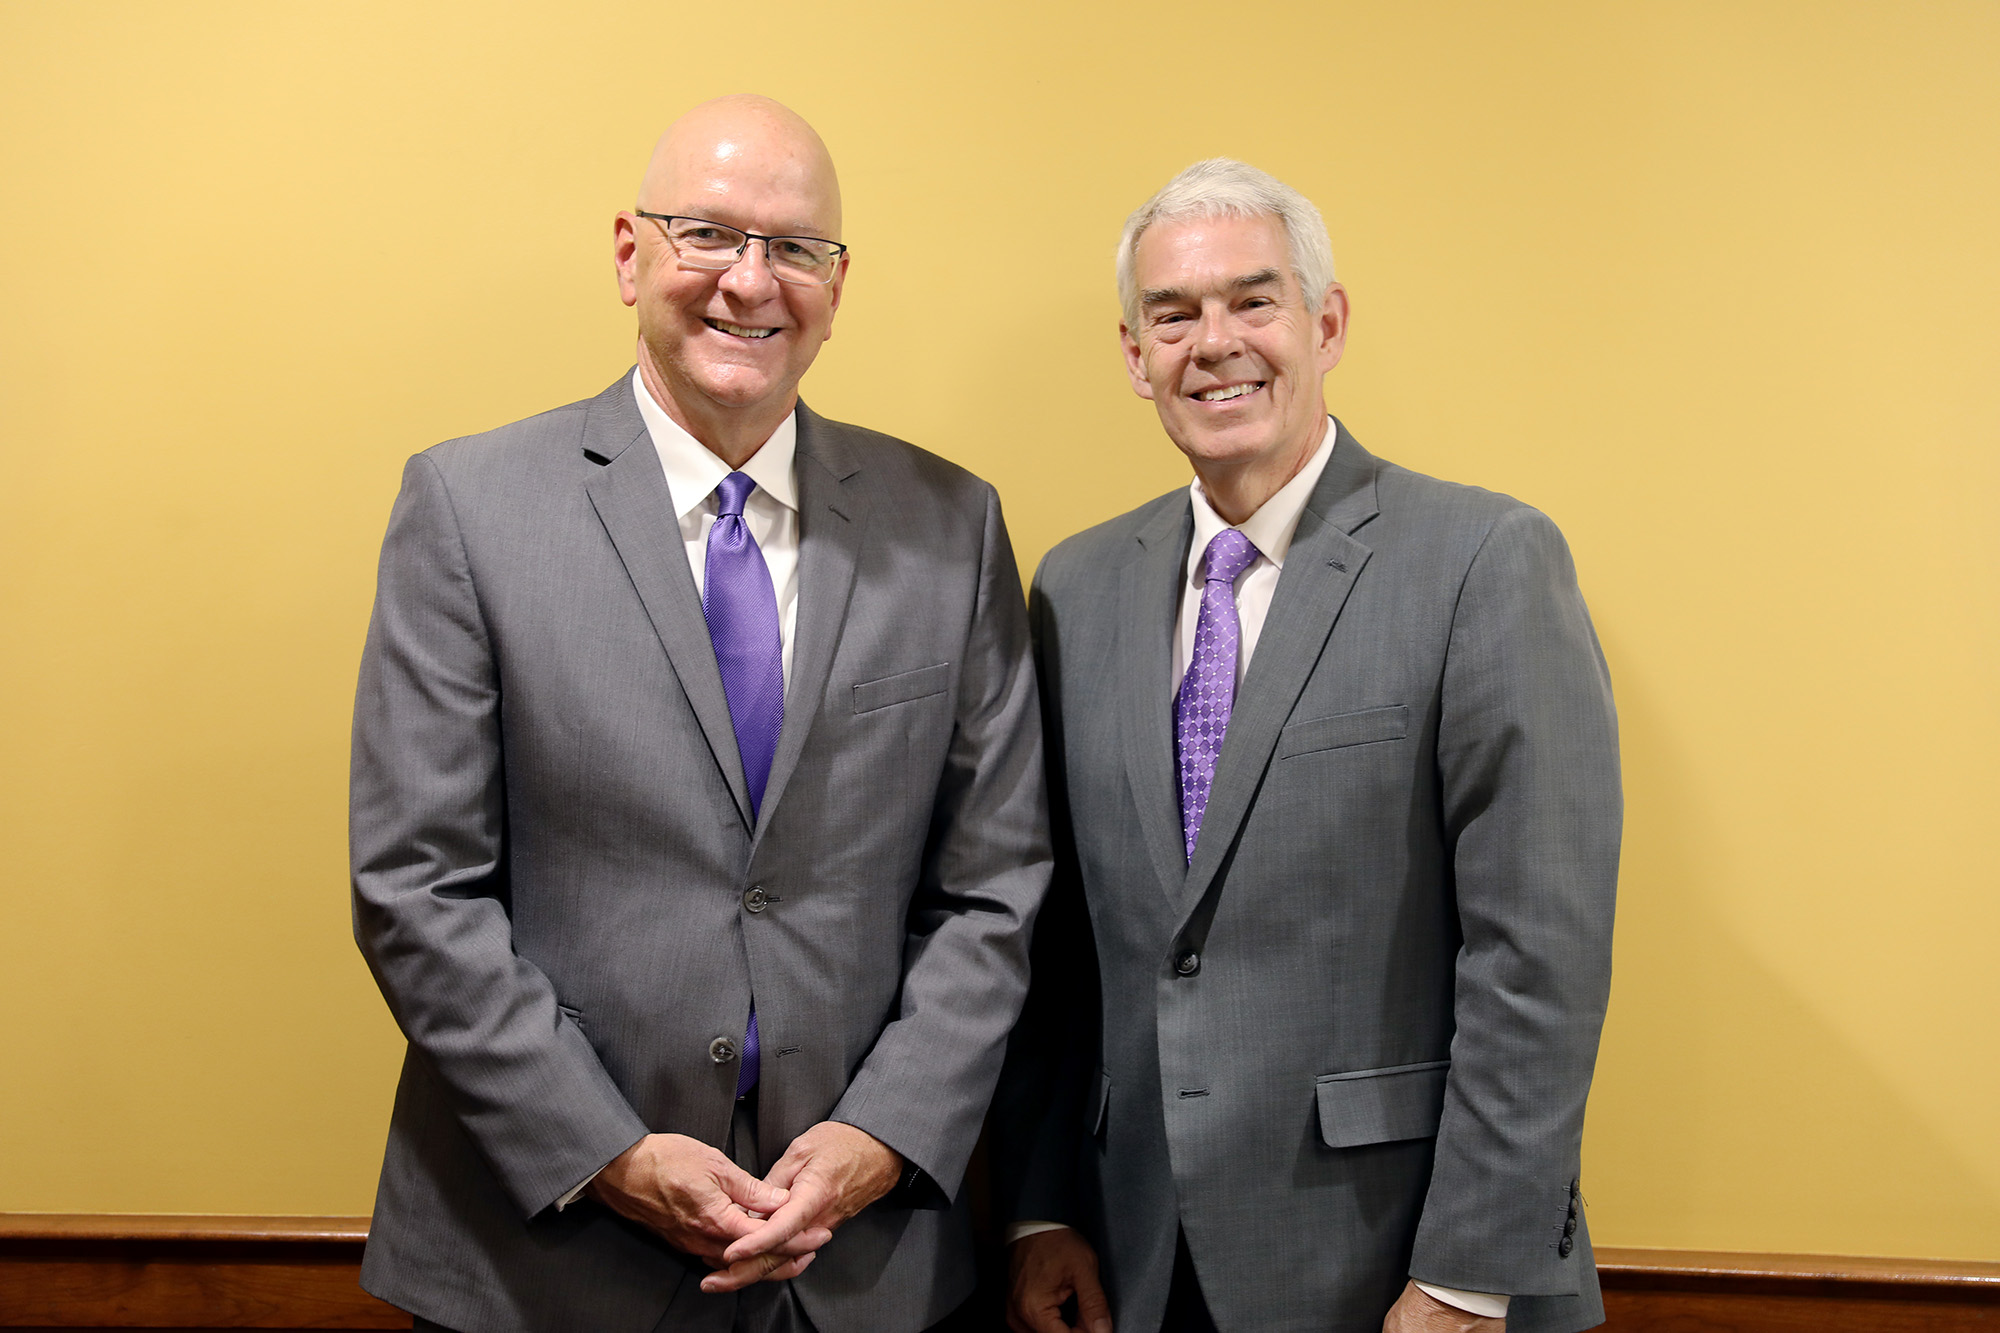 Chancellor of Ohio Department of Higher Education Visits Mount Union